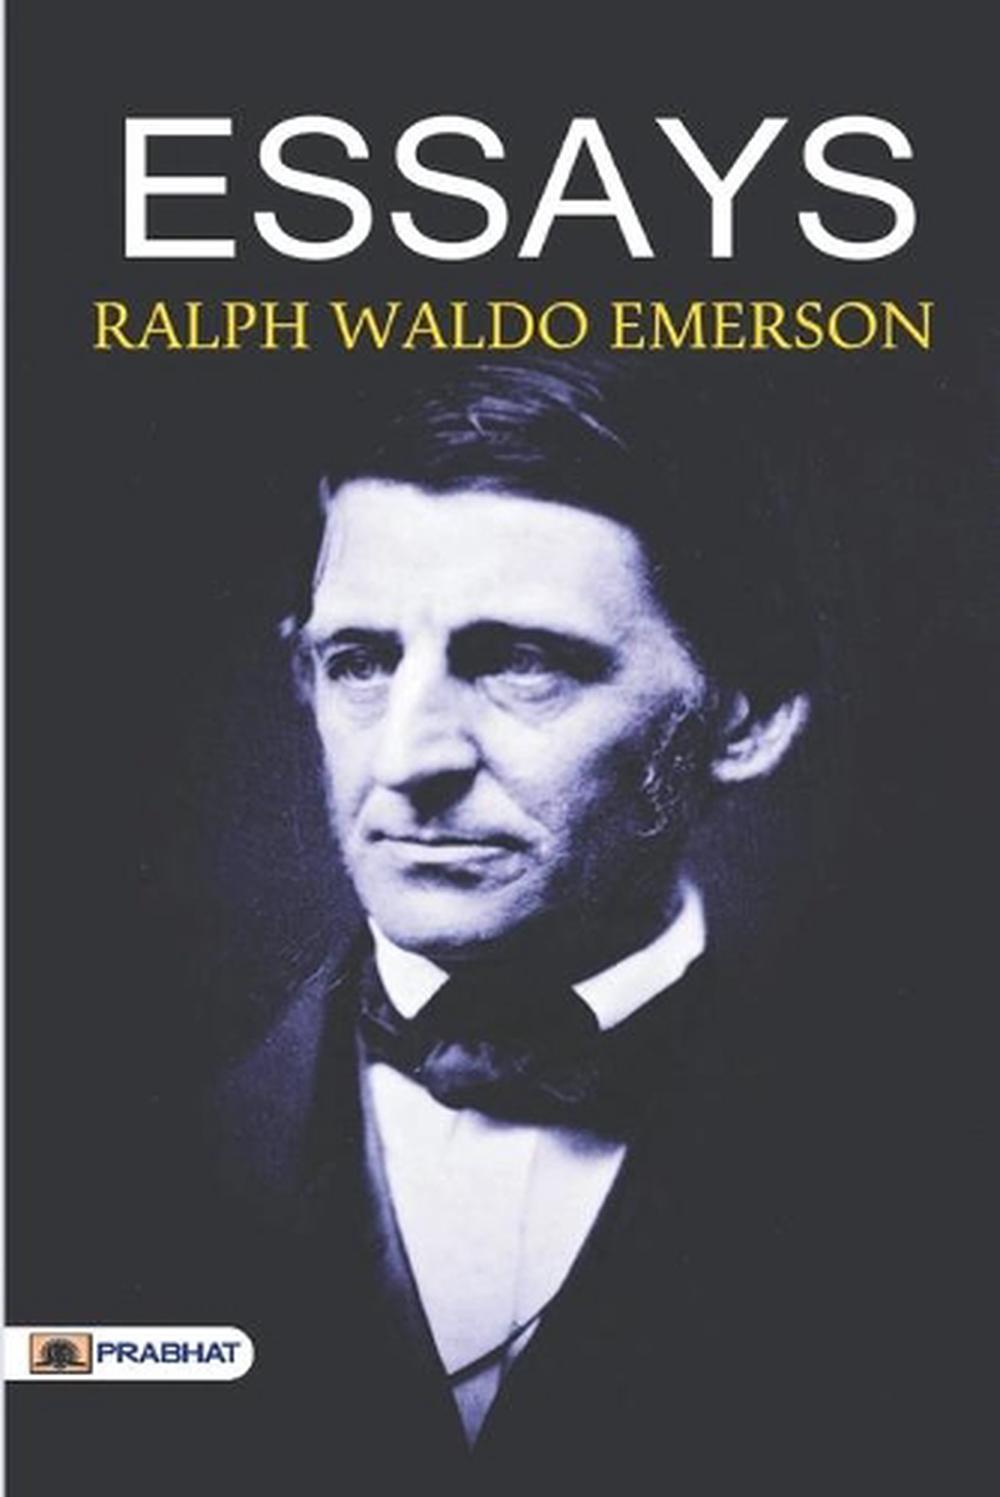 the complete essays and other writings of ralph waldo emerson